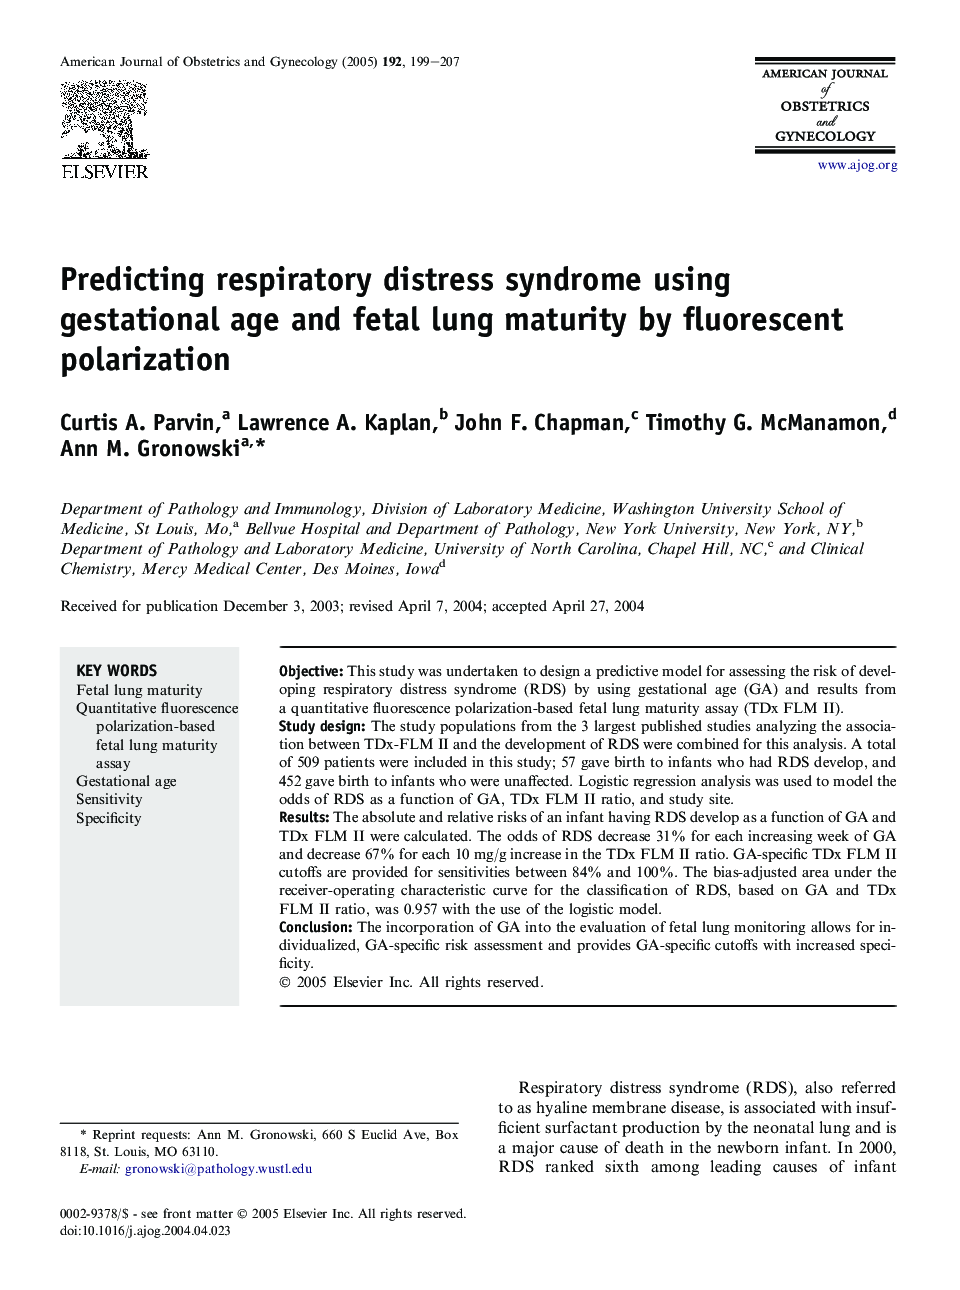 Predicting respiratory distress syndrome using gestational age and fetal lung maturity by fluorescent polarization